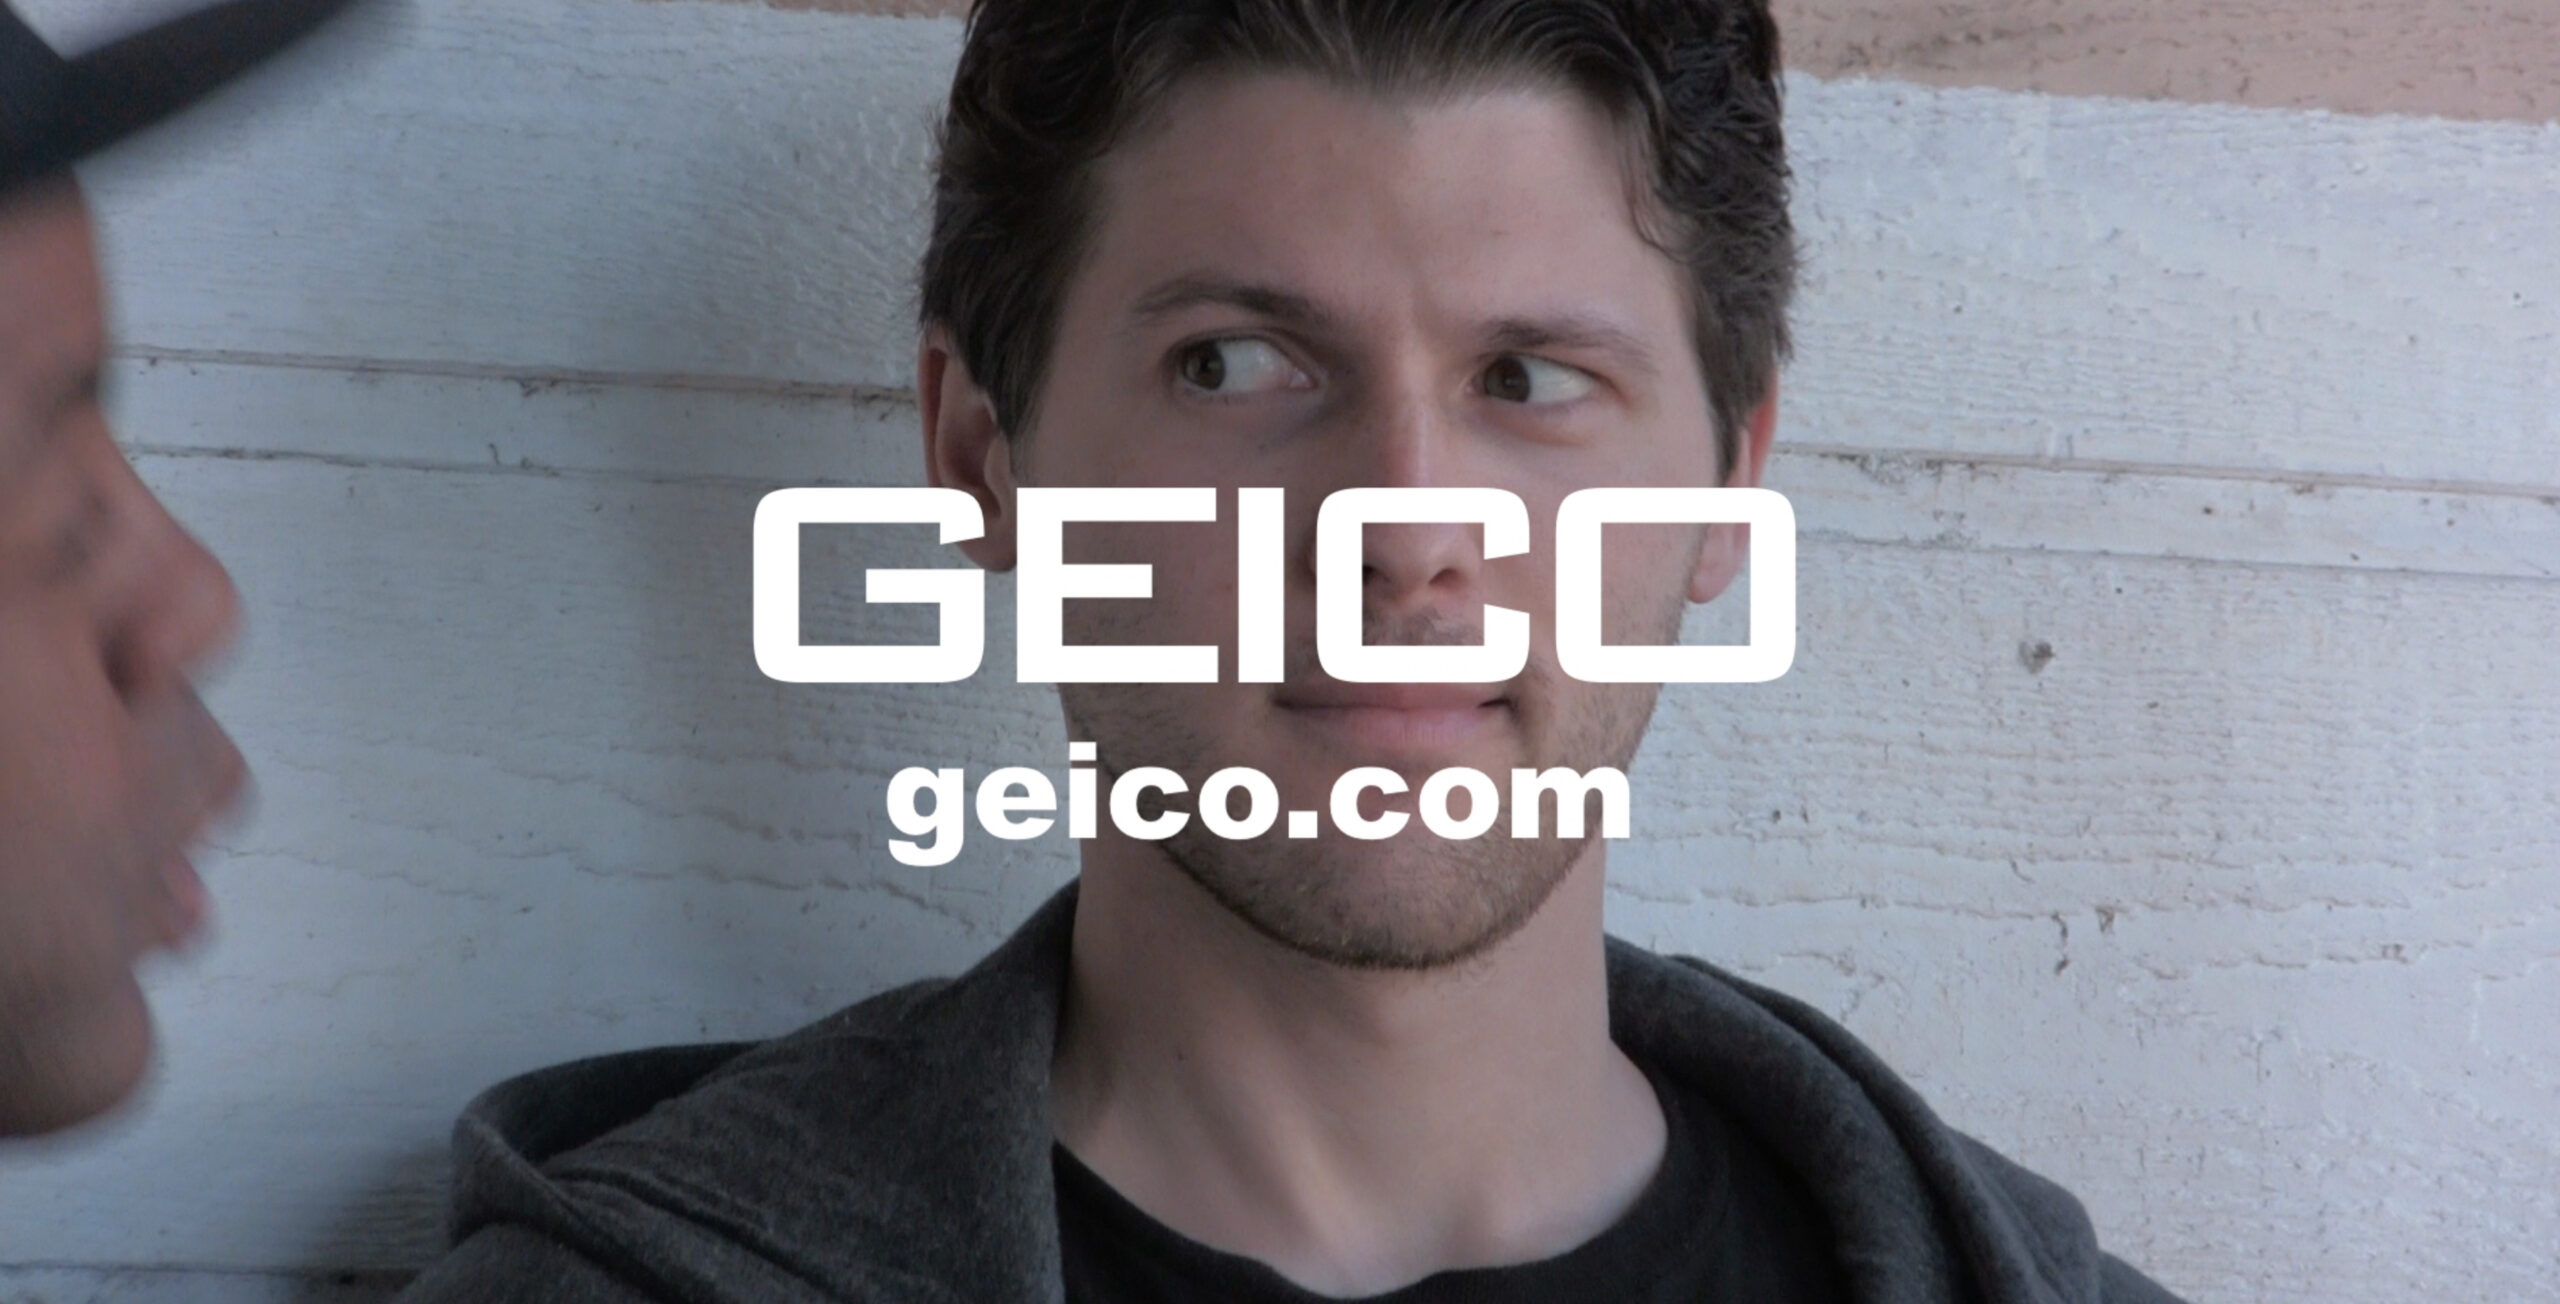 still from Pirromount's Geico parody commercial